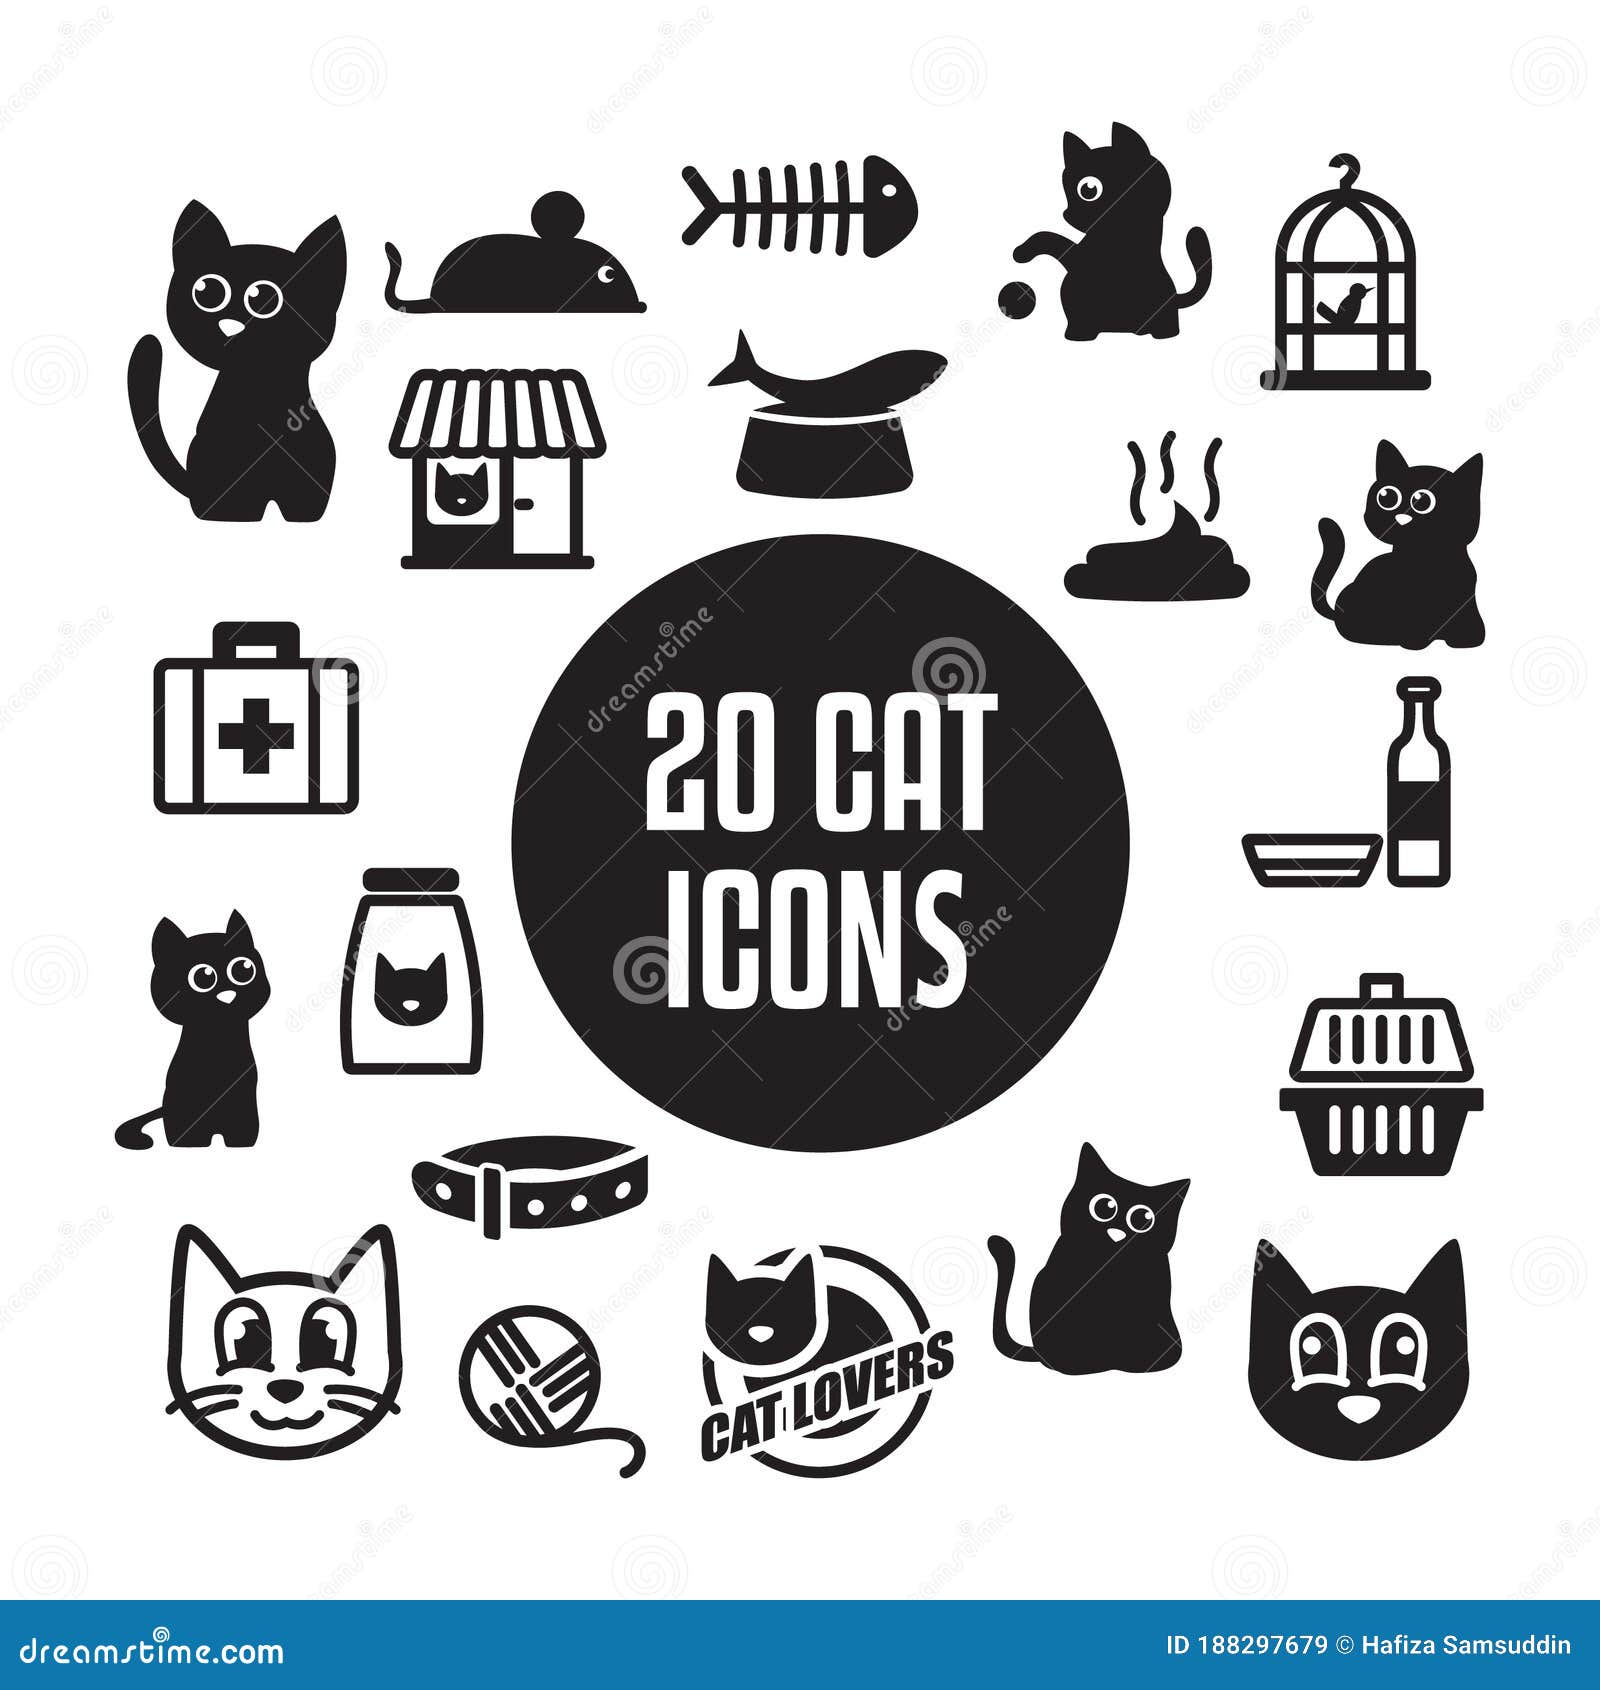 Free: Cat icons collection 